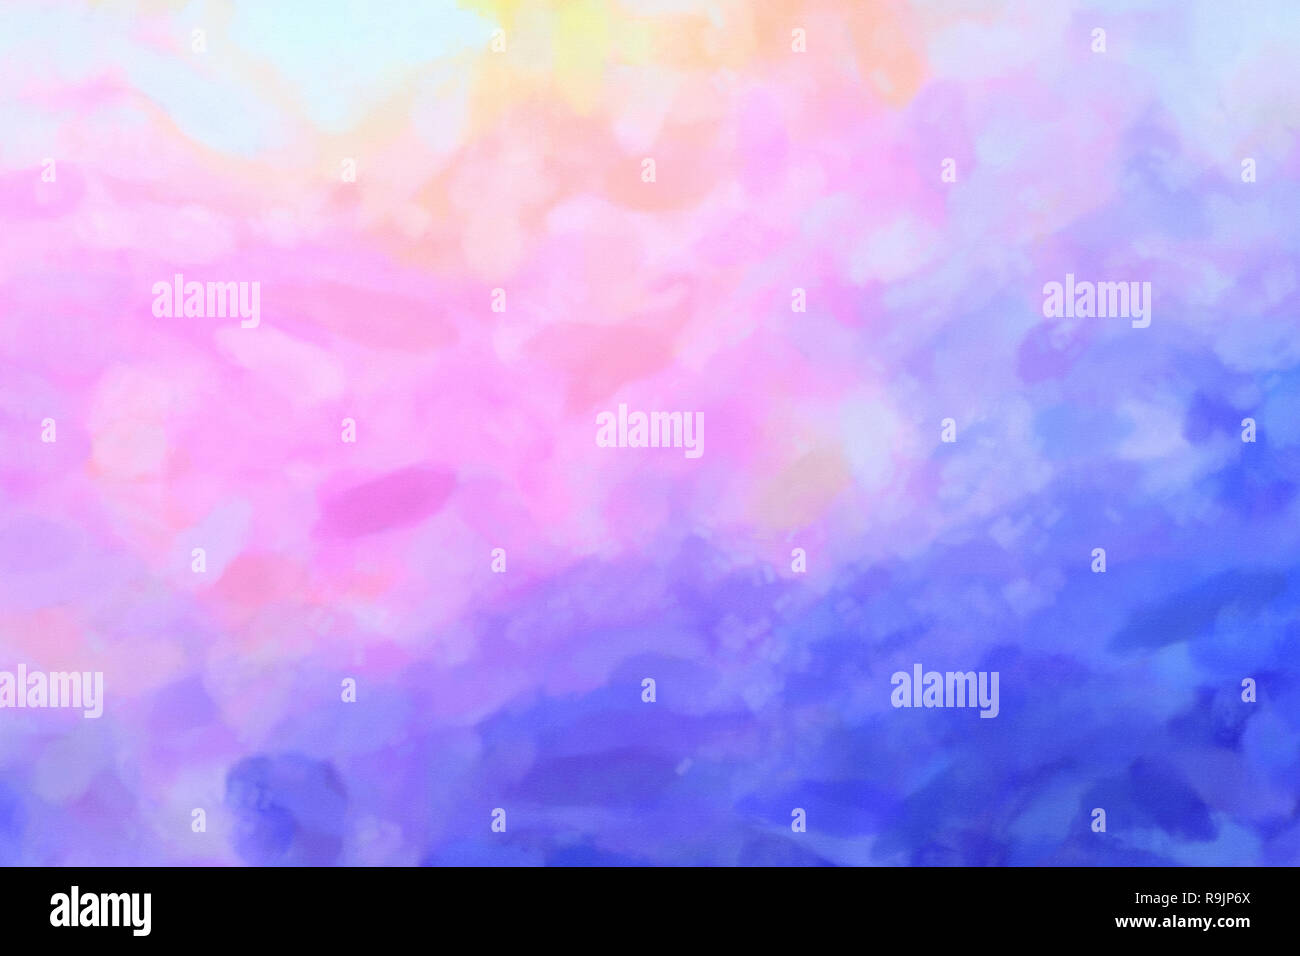 White pink blue watercolor gradient background. Colorful digital illustration simulating true watercolor with paper texture. Stock Photo